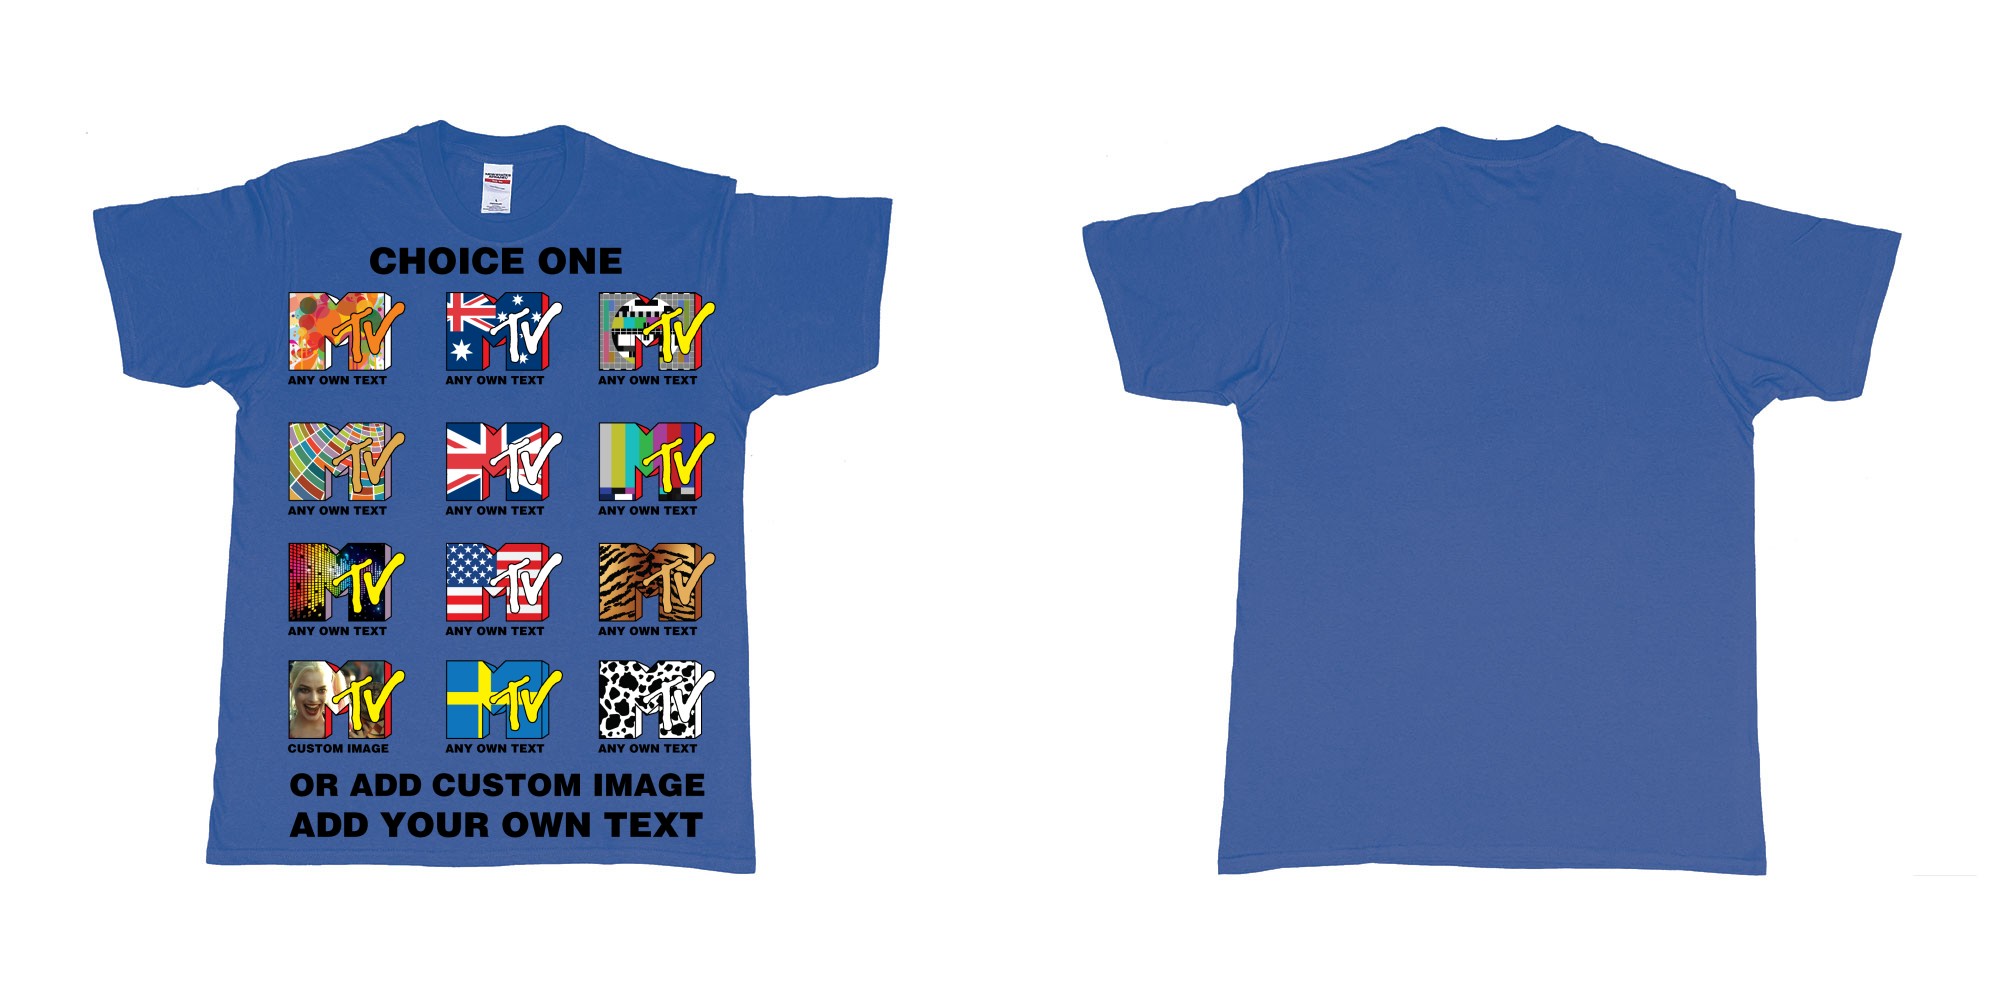 Custom tshirt design mtv logo choice any background text print in fabric color royal-blue choice your own text made in Bali by The Pirate Way